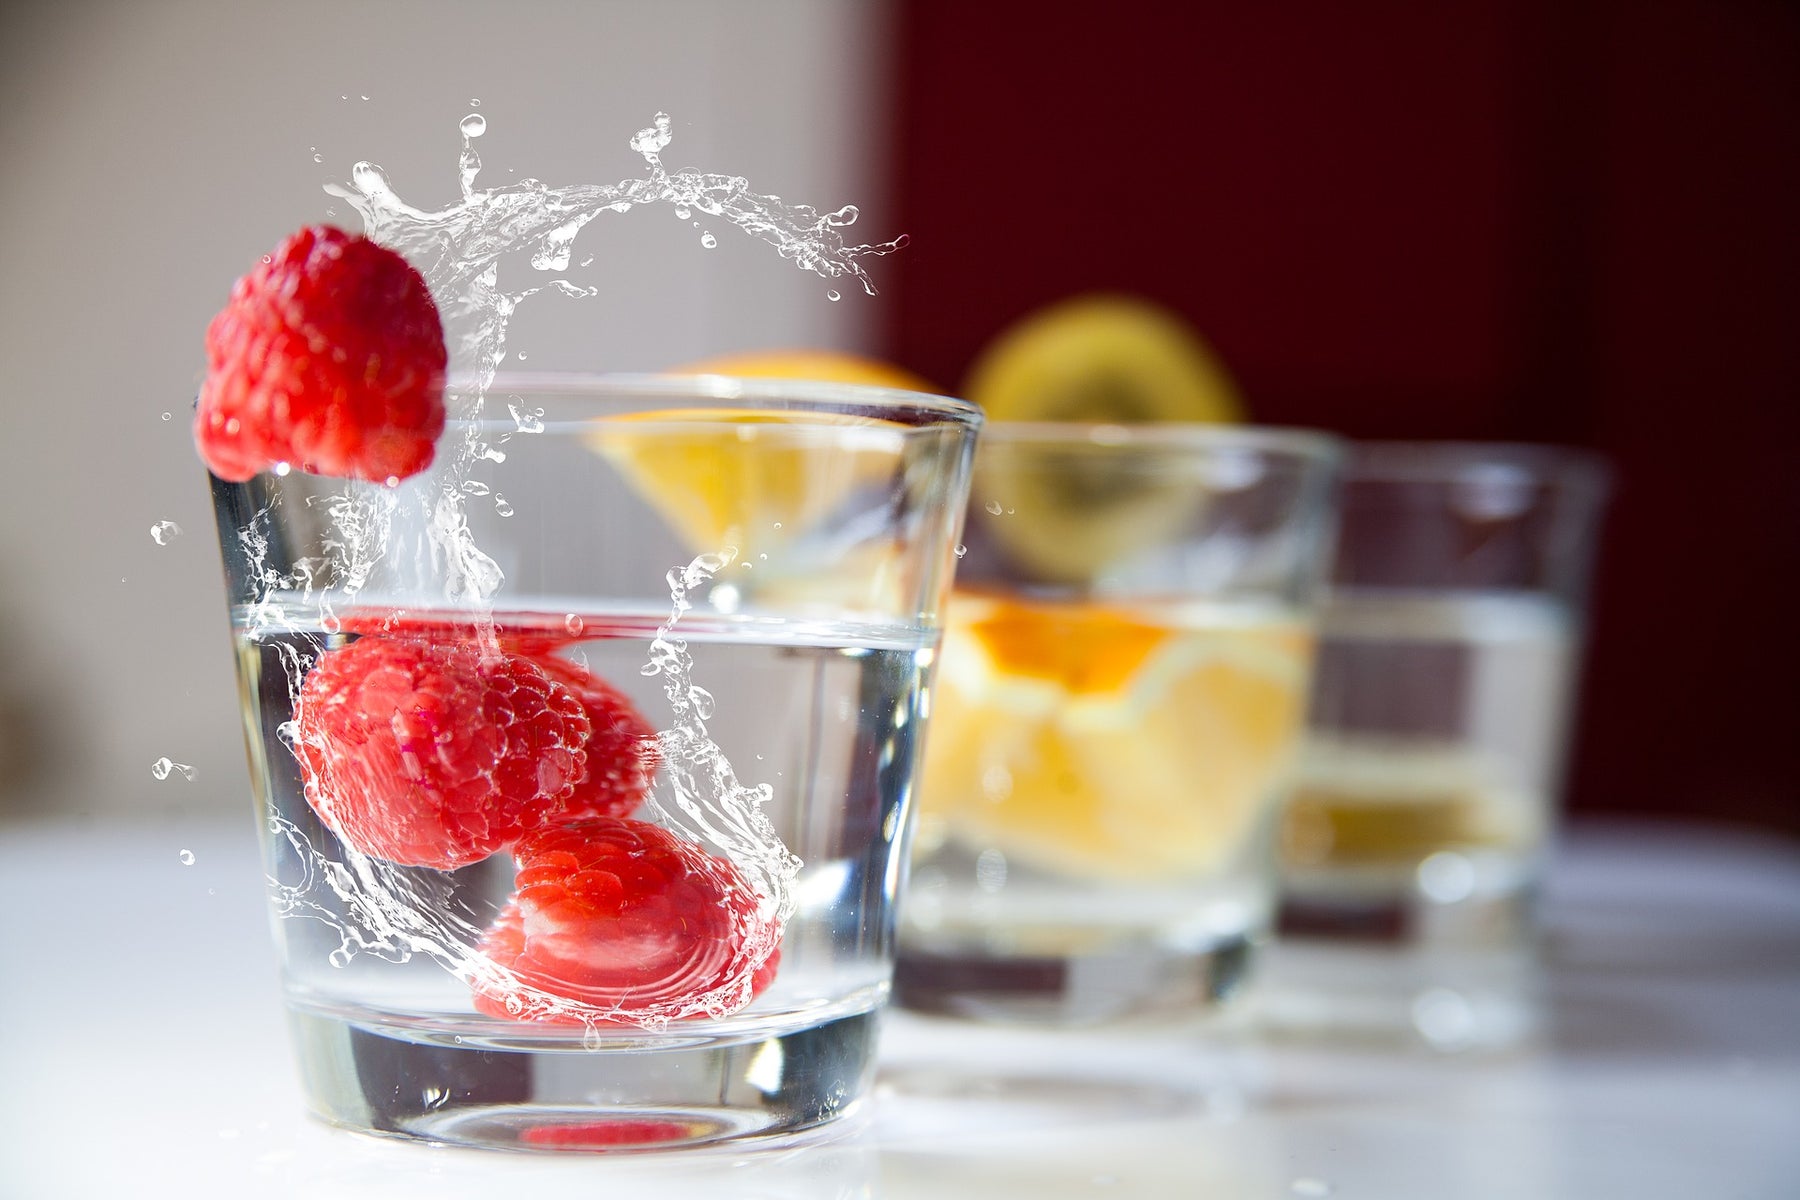 Raspberries dropped in a glass of water